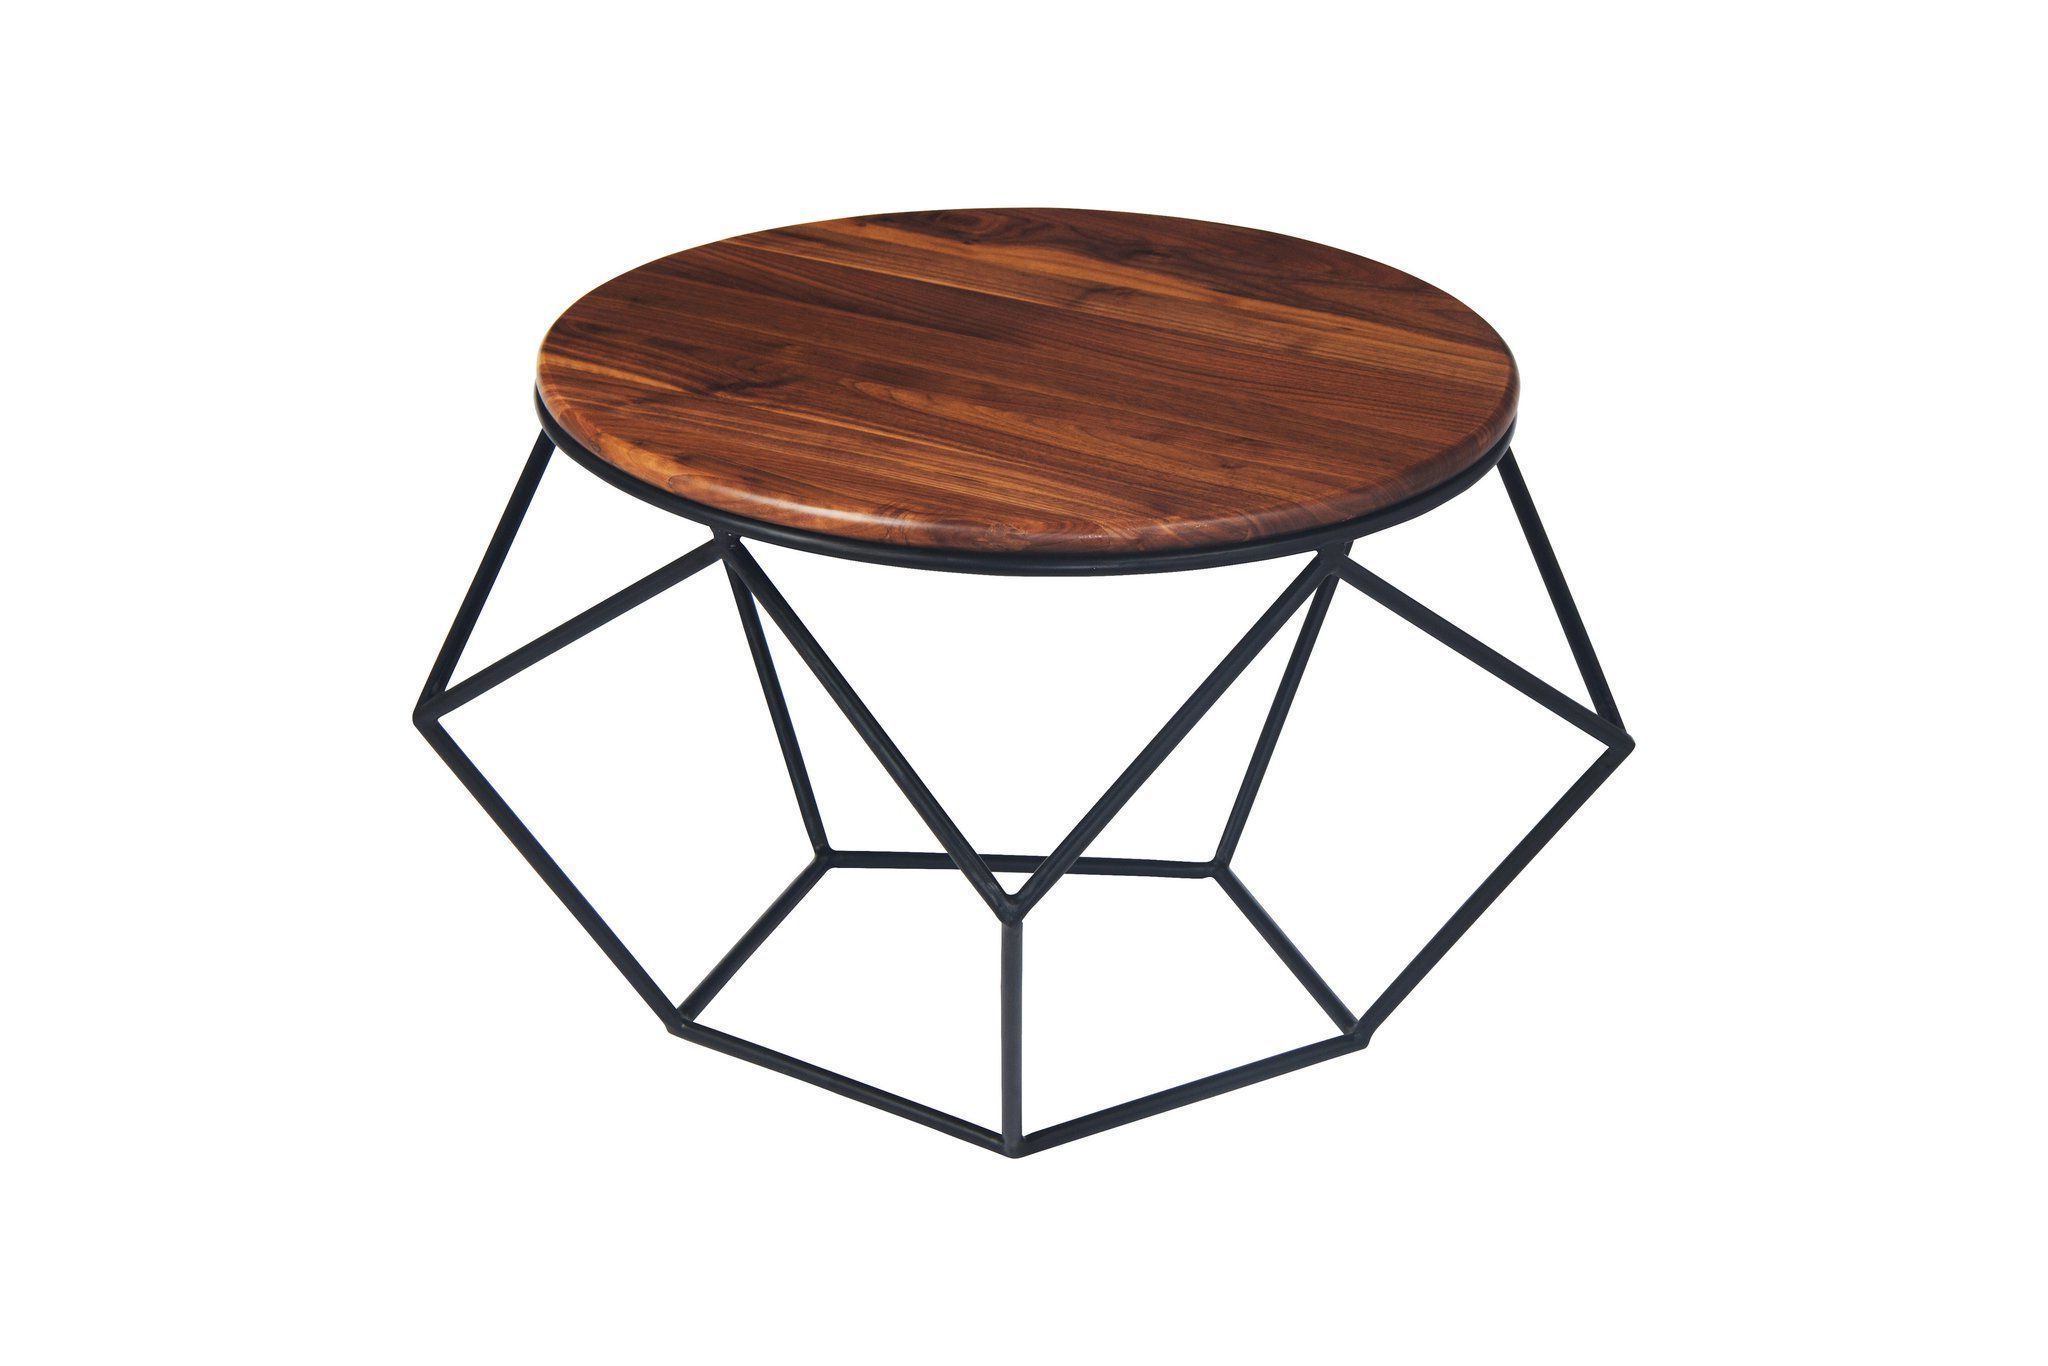 Matte Black Coffee Tables Regarding Most Popular 152mblk,alix Coffee Table Walnut And Black Matte (View 4 of 10)